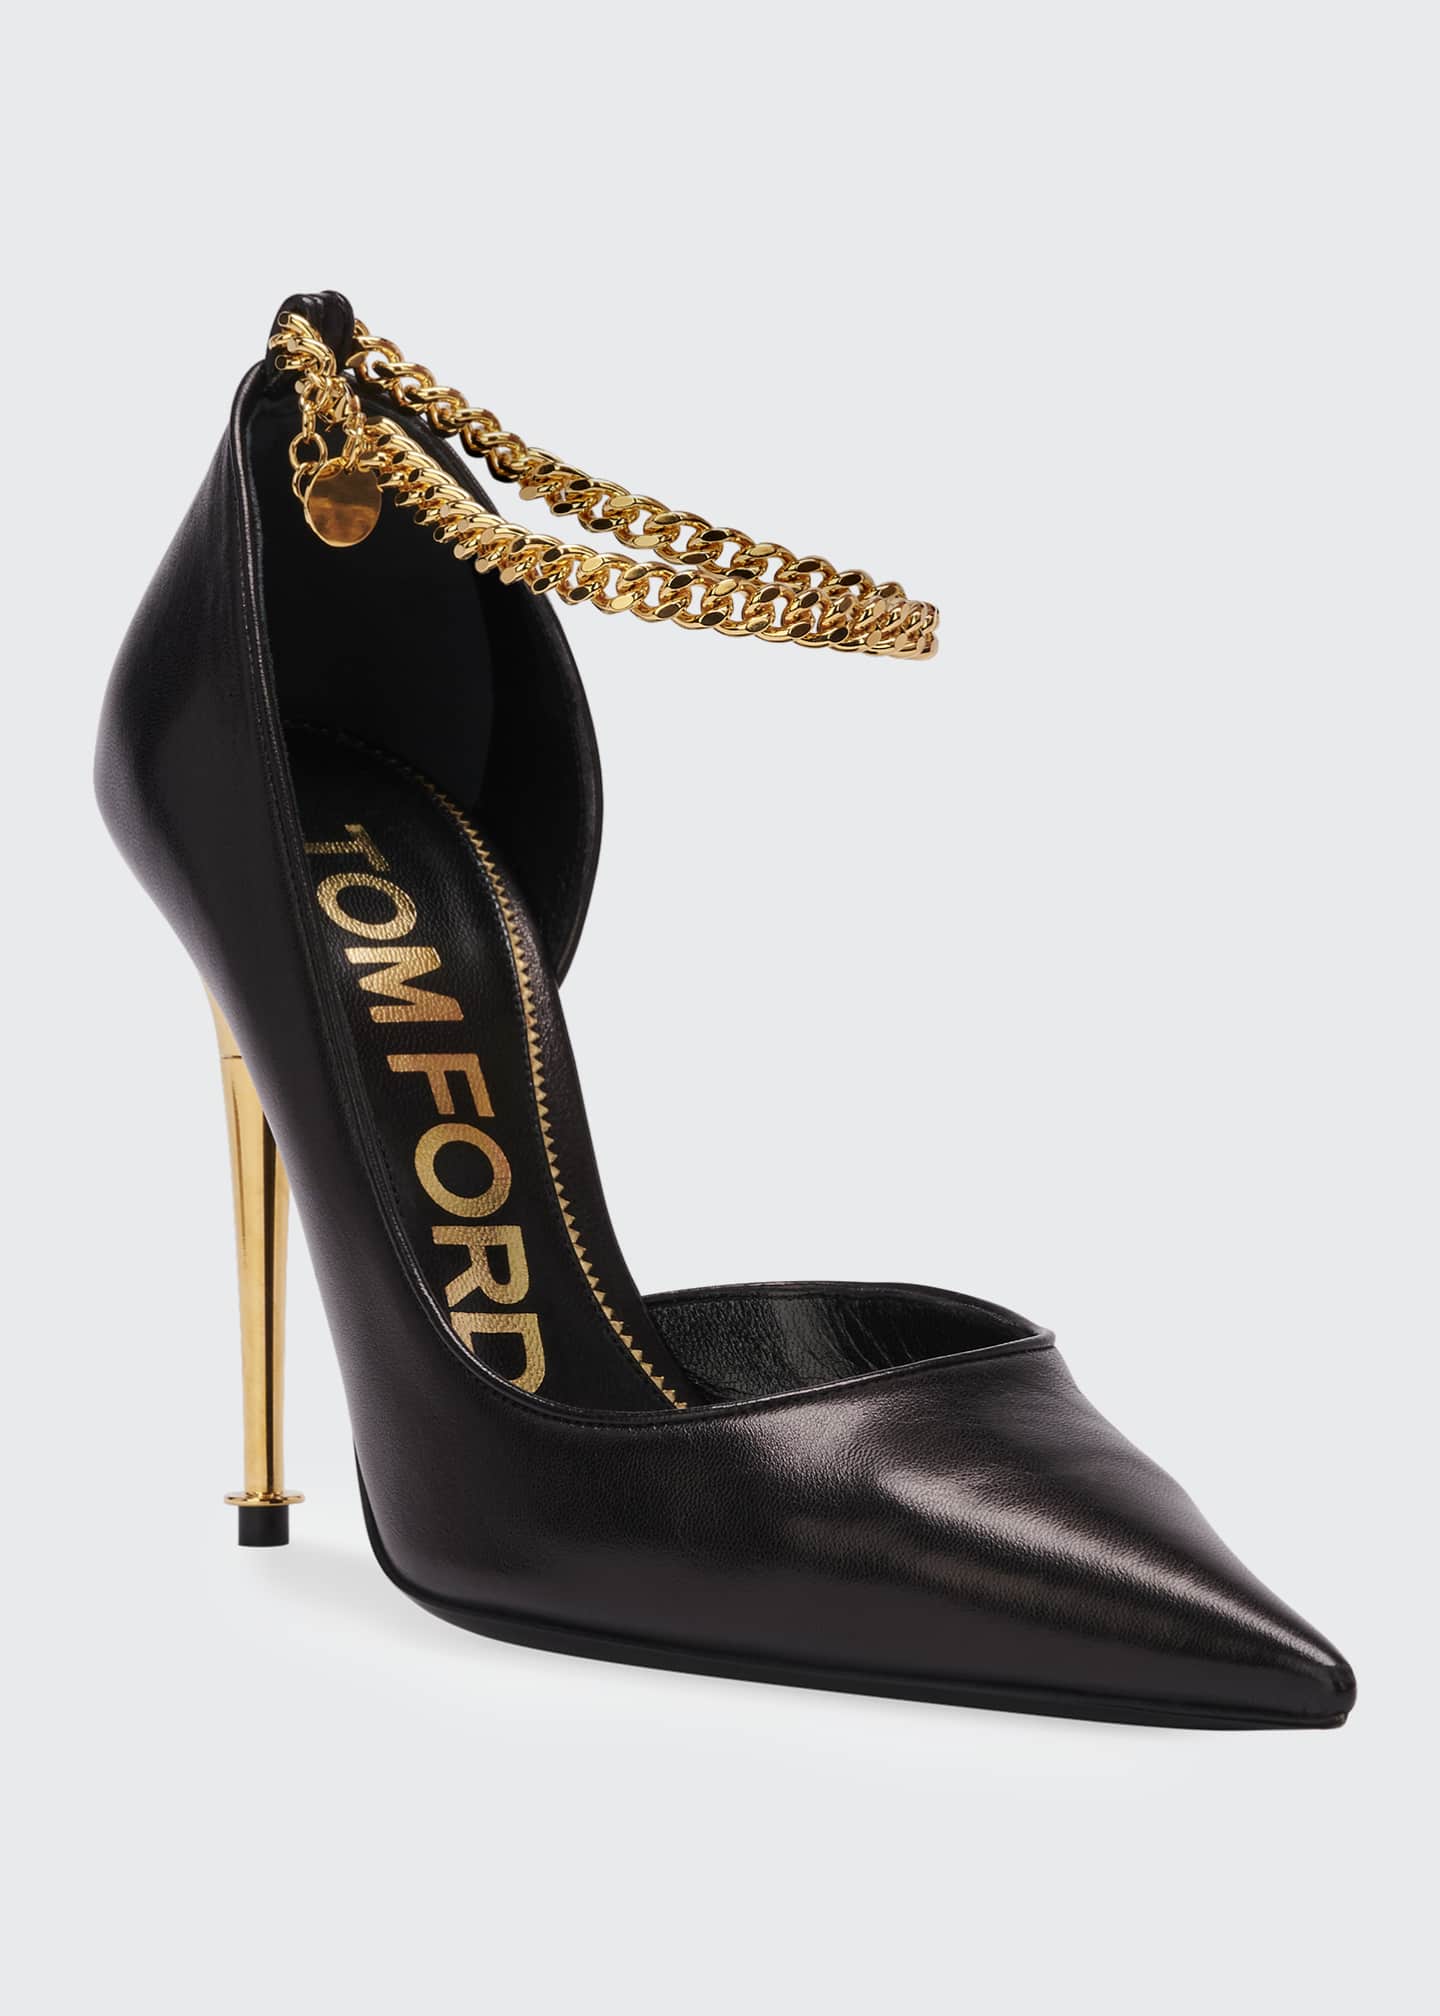 TOM FORD Open-Side Pumps with Chain Strap - Bergdorf Goodman